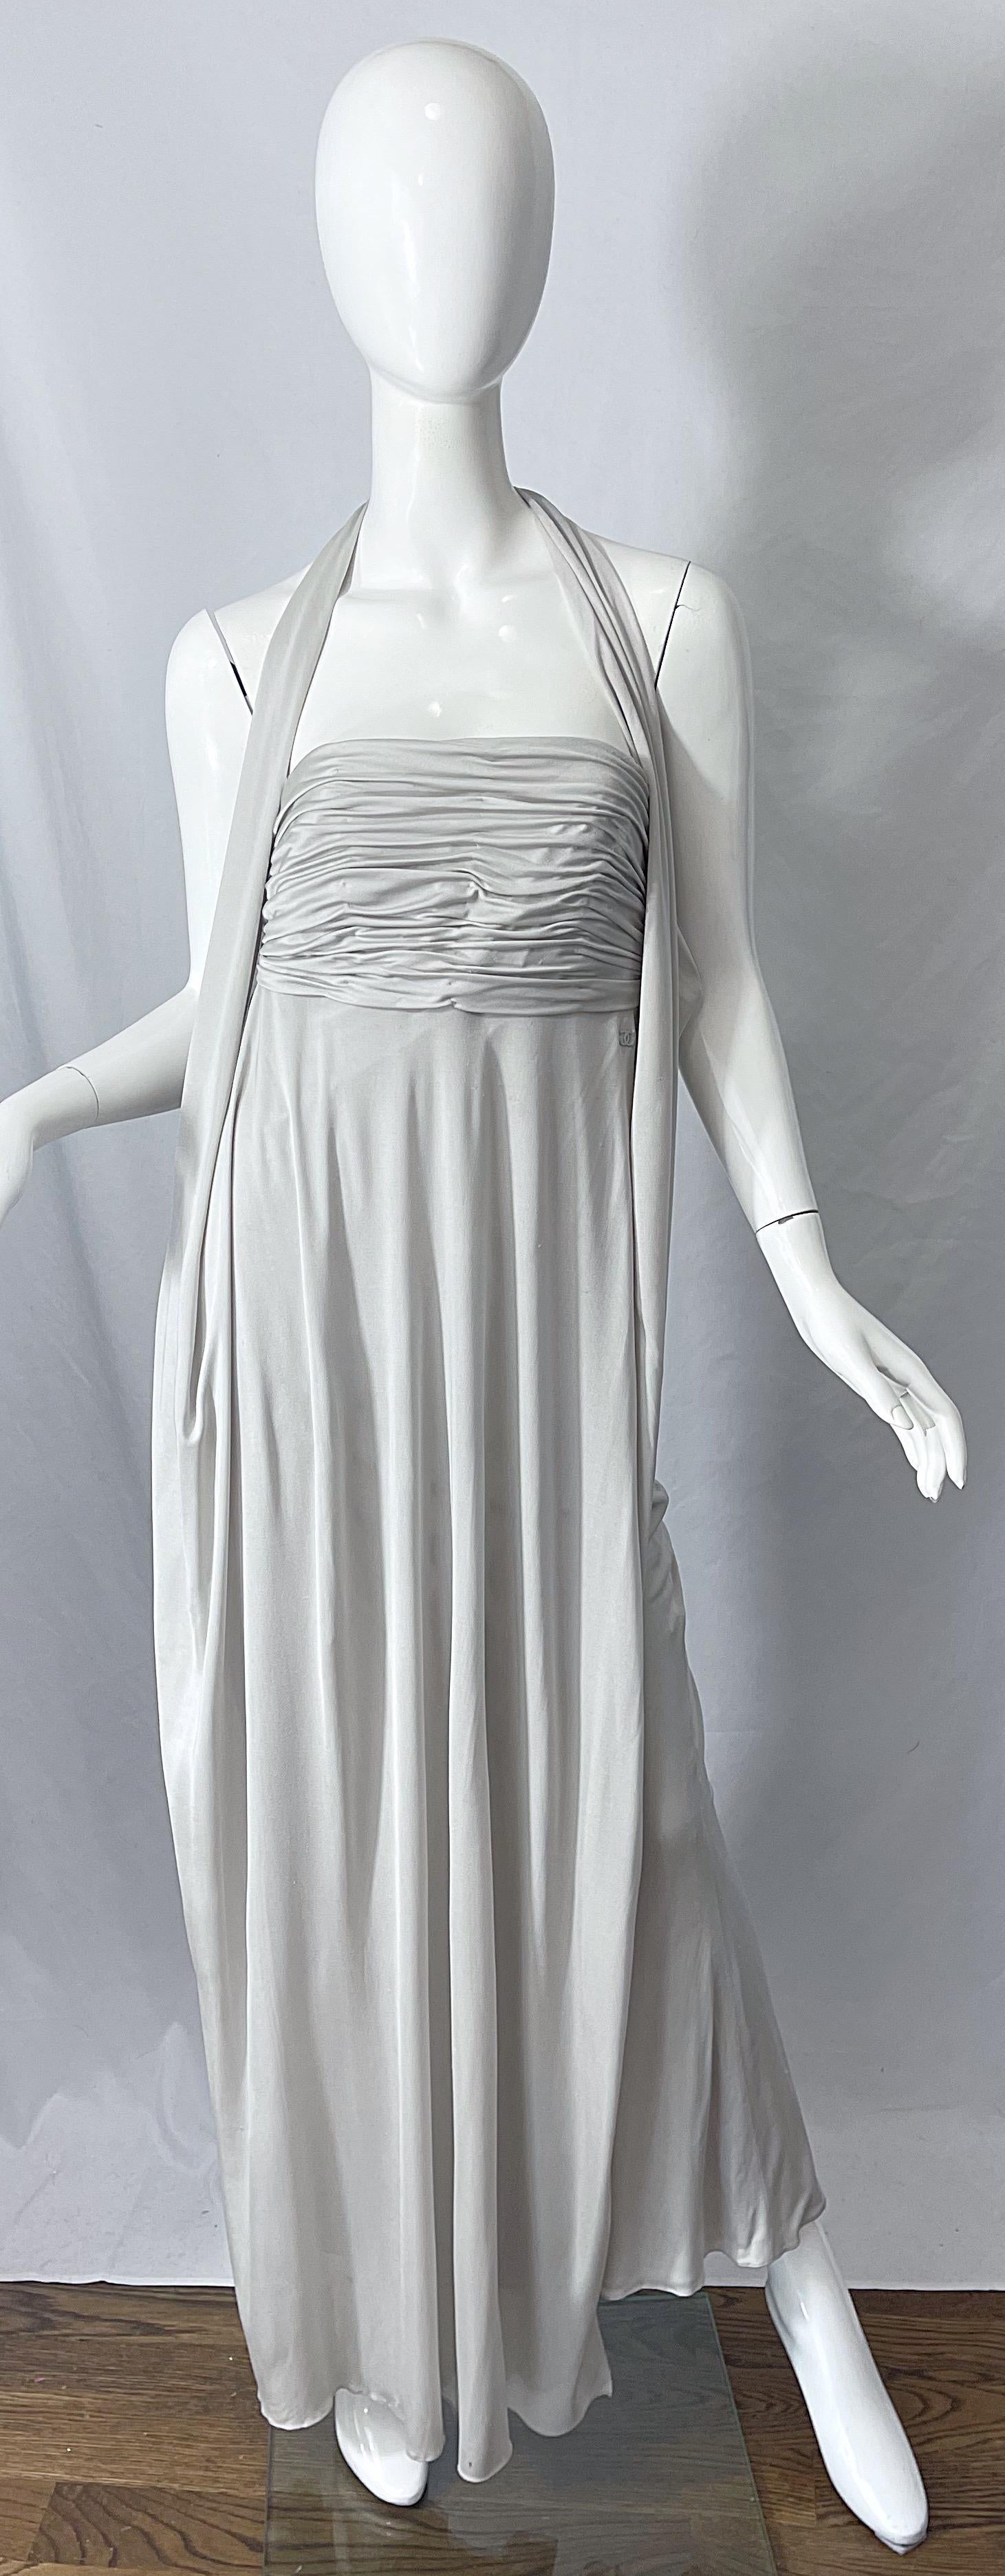 Beautiful vintage new w/ tags CHANEL Cruise 2004 by KARL LAGERFELD Cruise silk jersey gray halter gown ! Features a ruched bodice with CC logo at right waist. Sexy open back reveals just the right amount of skin. Hidden hook-and-eye closures at back